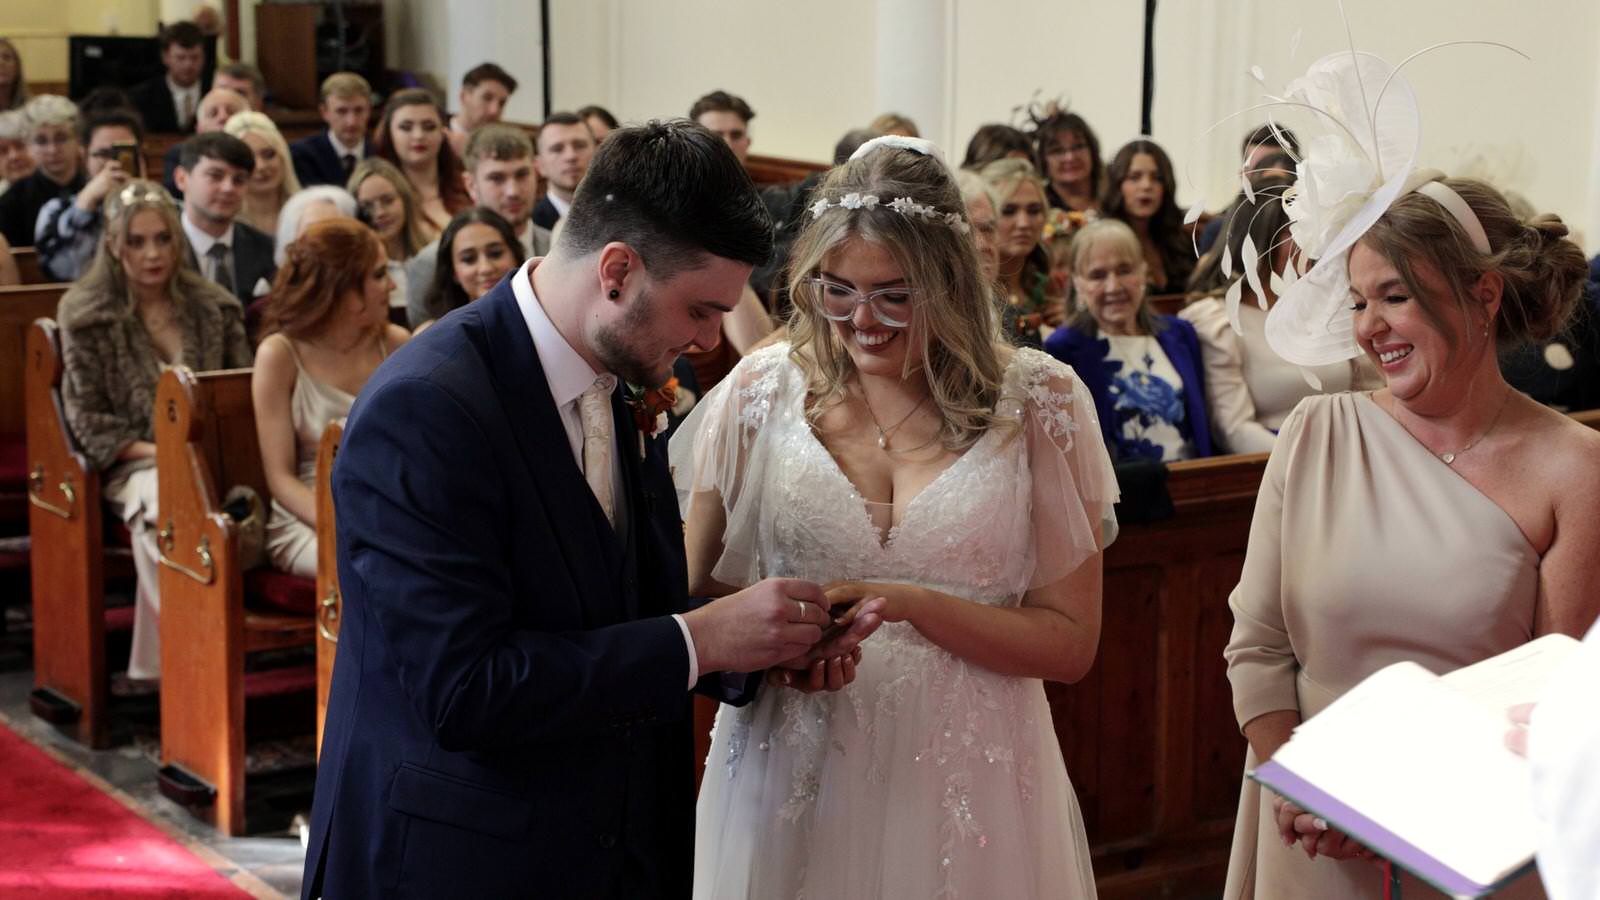 couple exchange wedding rings during Holy Trinity ceremony